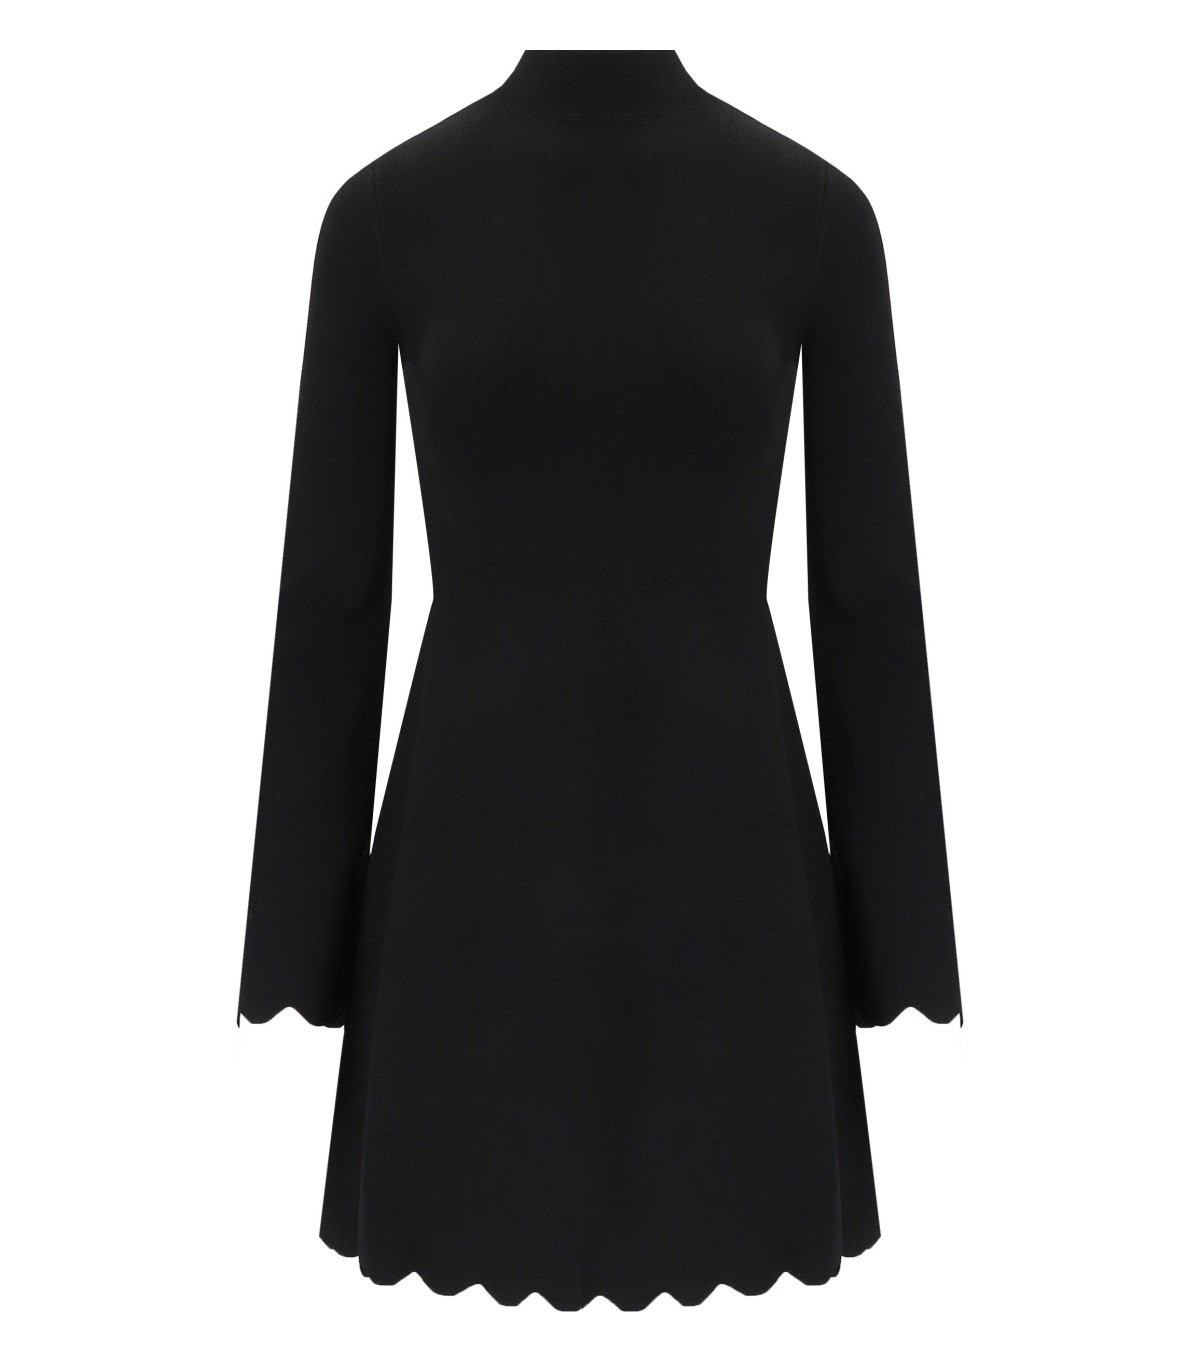 TWINSET BLACK KNITTED DRESS